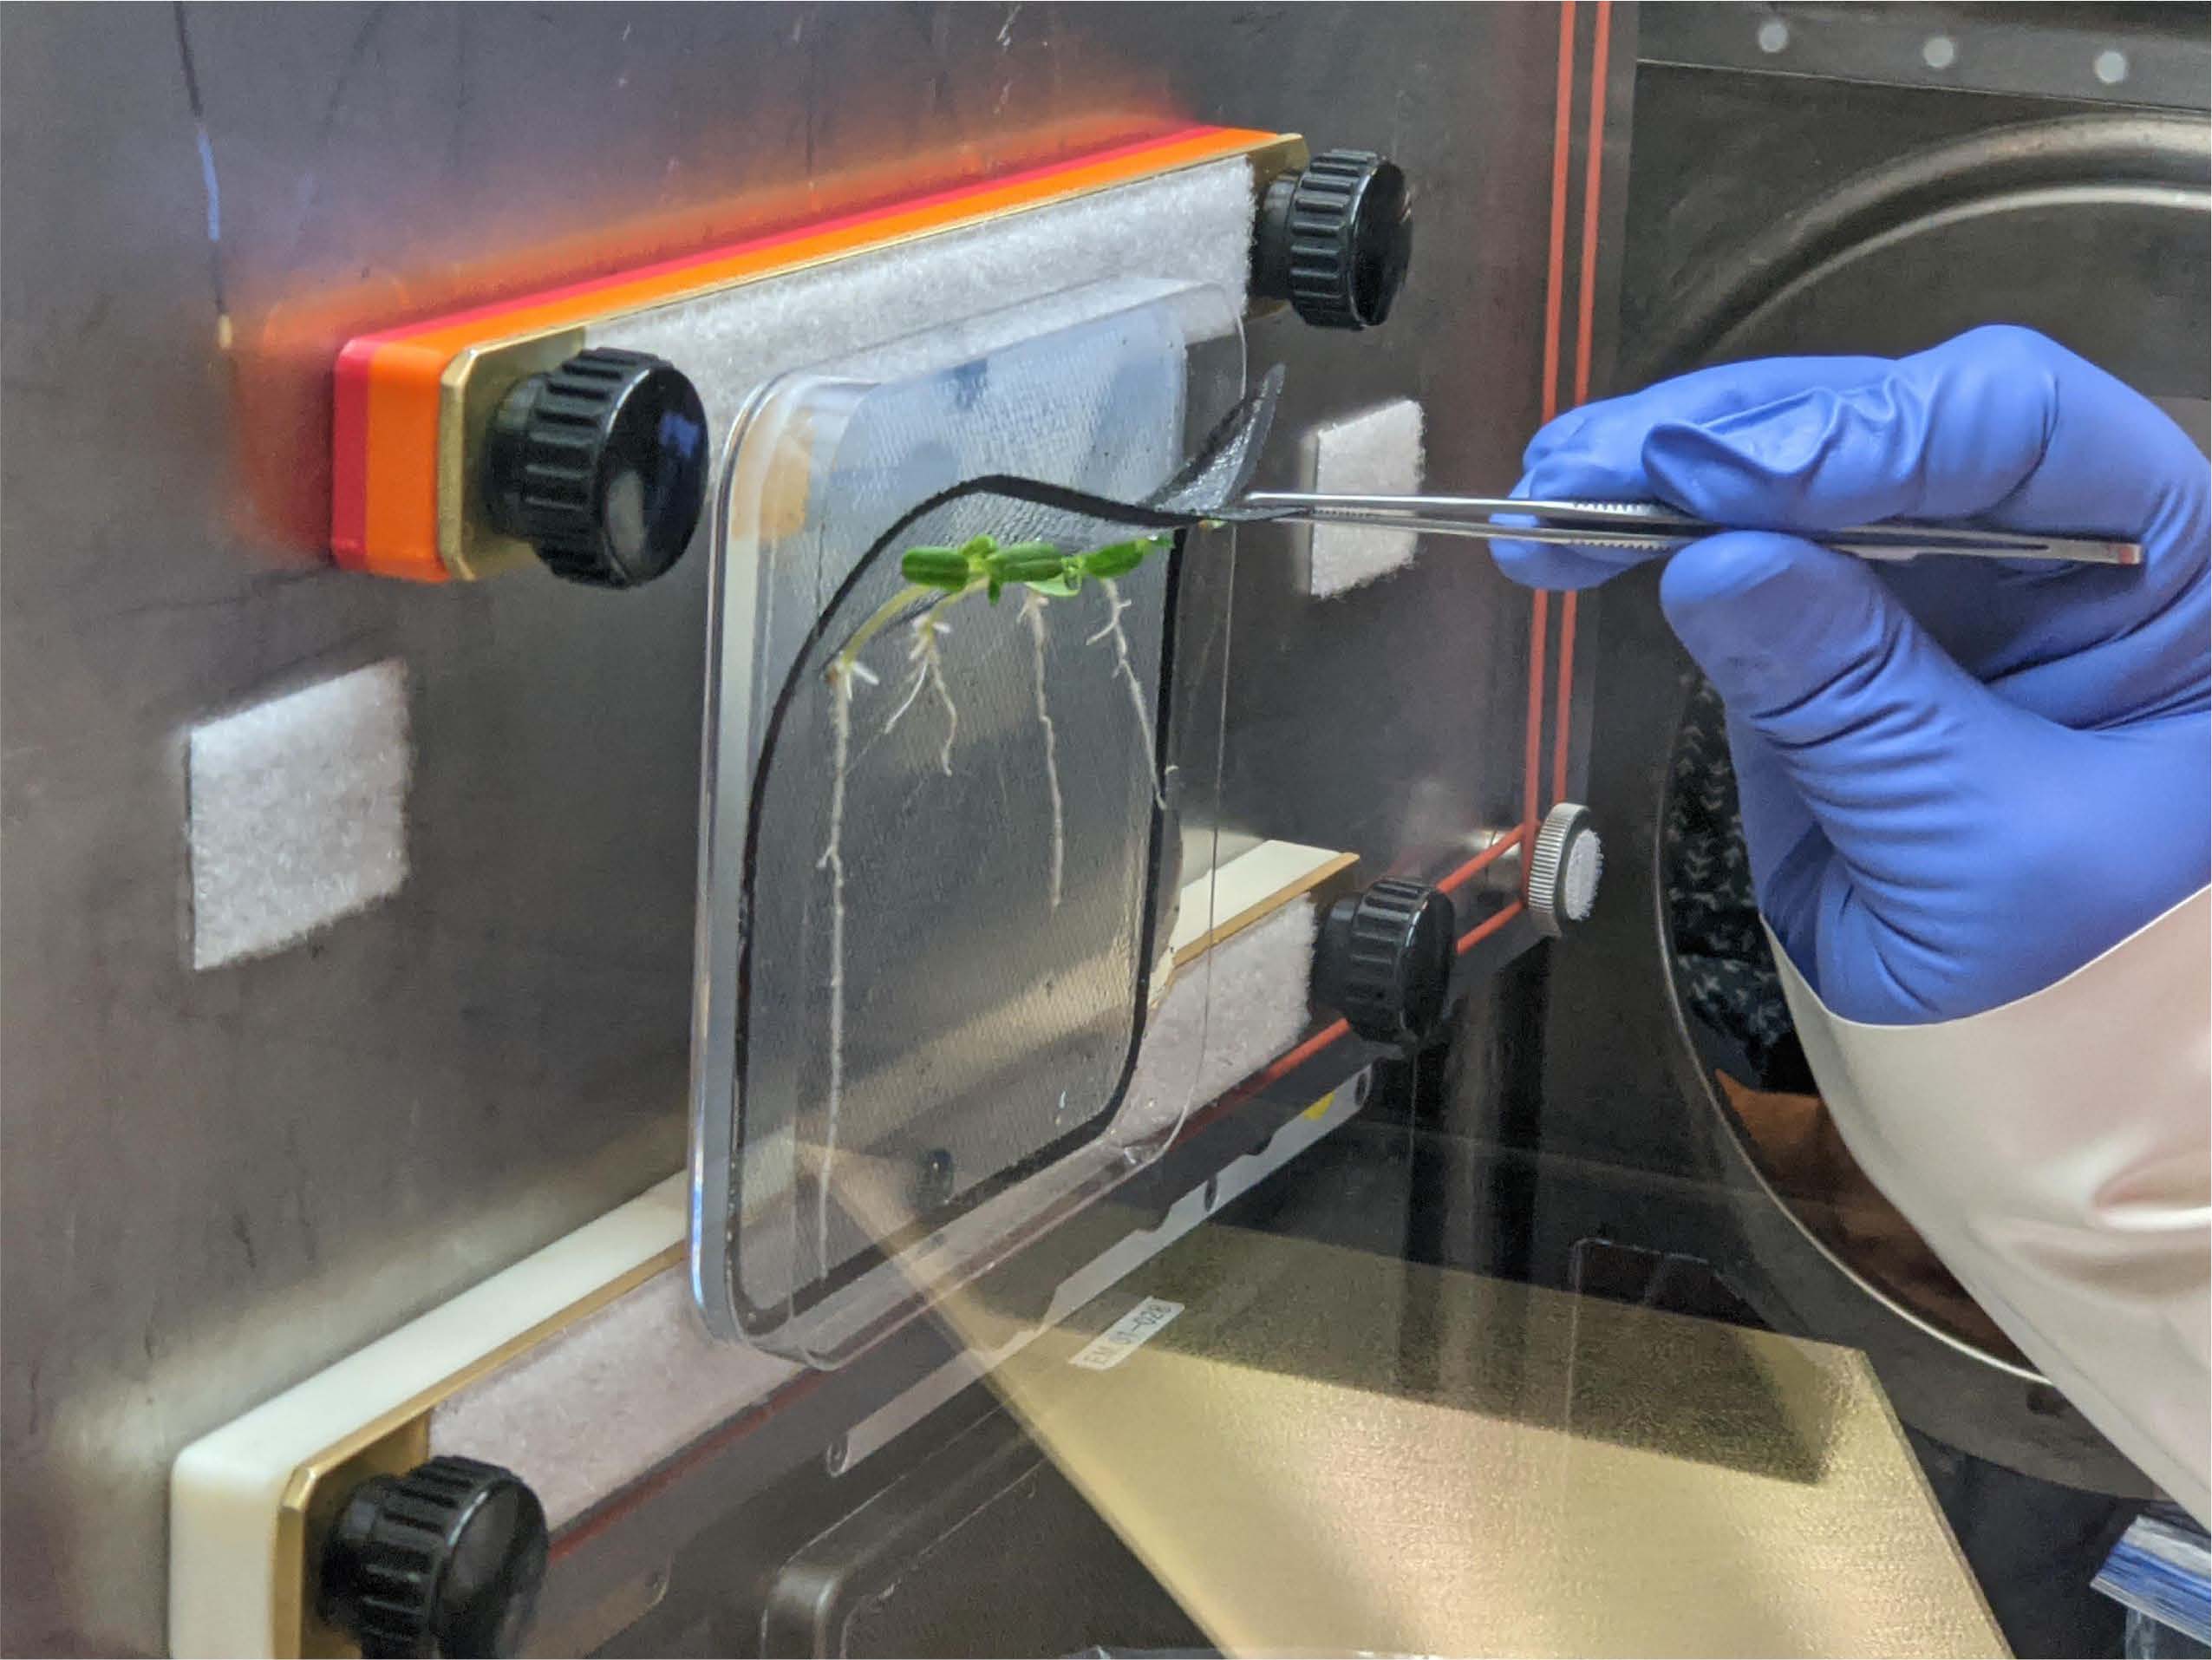 A researcher studies plants in the Life Science Glove Box.